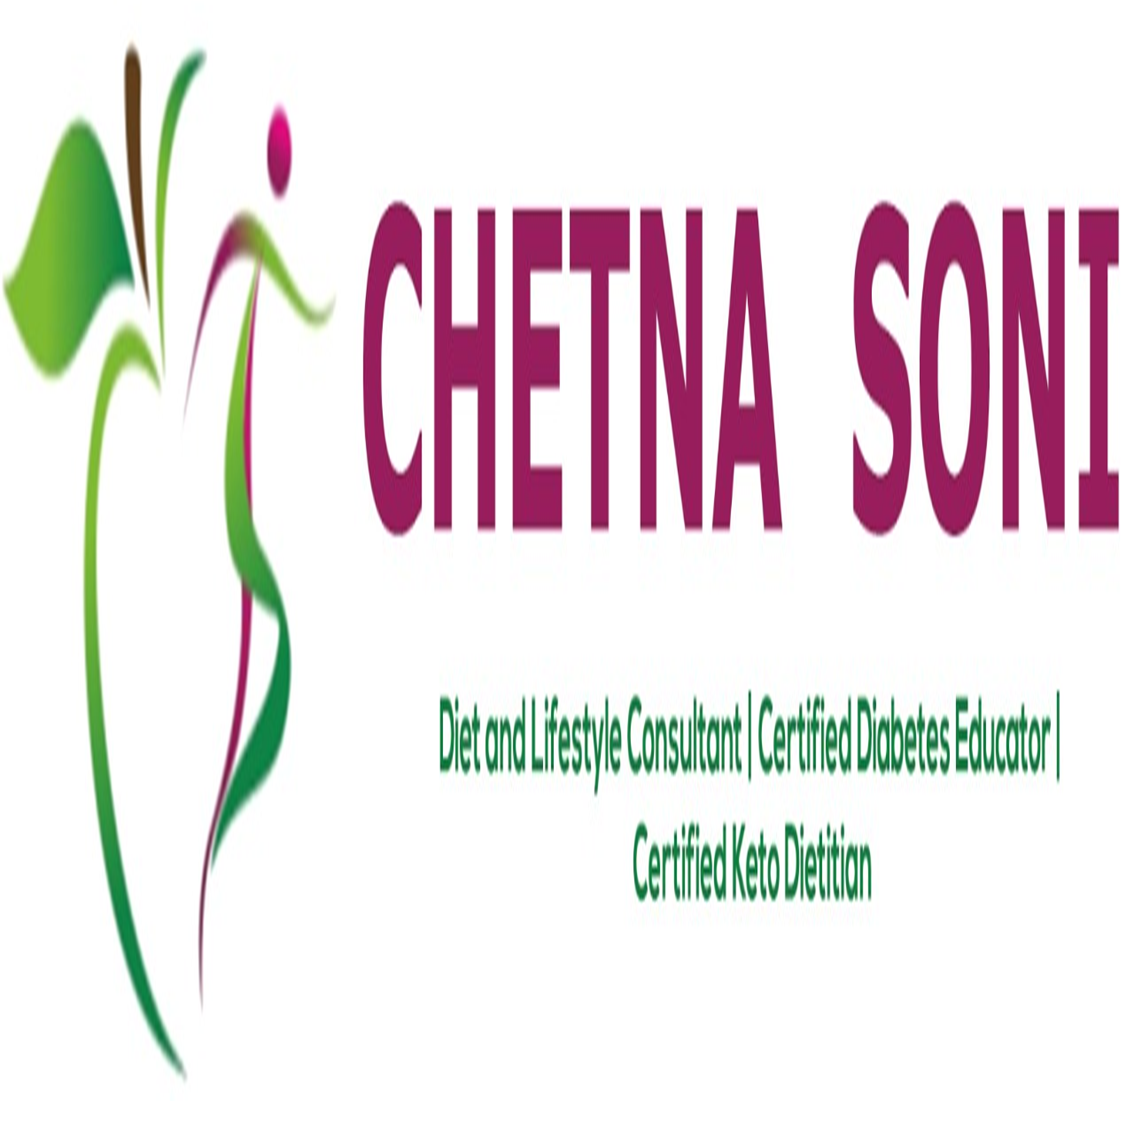 Chetna Soni Diet and Lifestyle Consultant